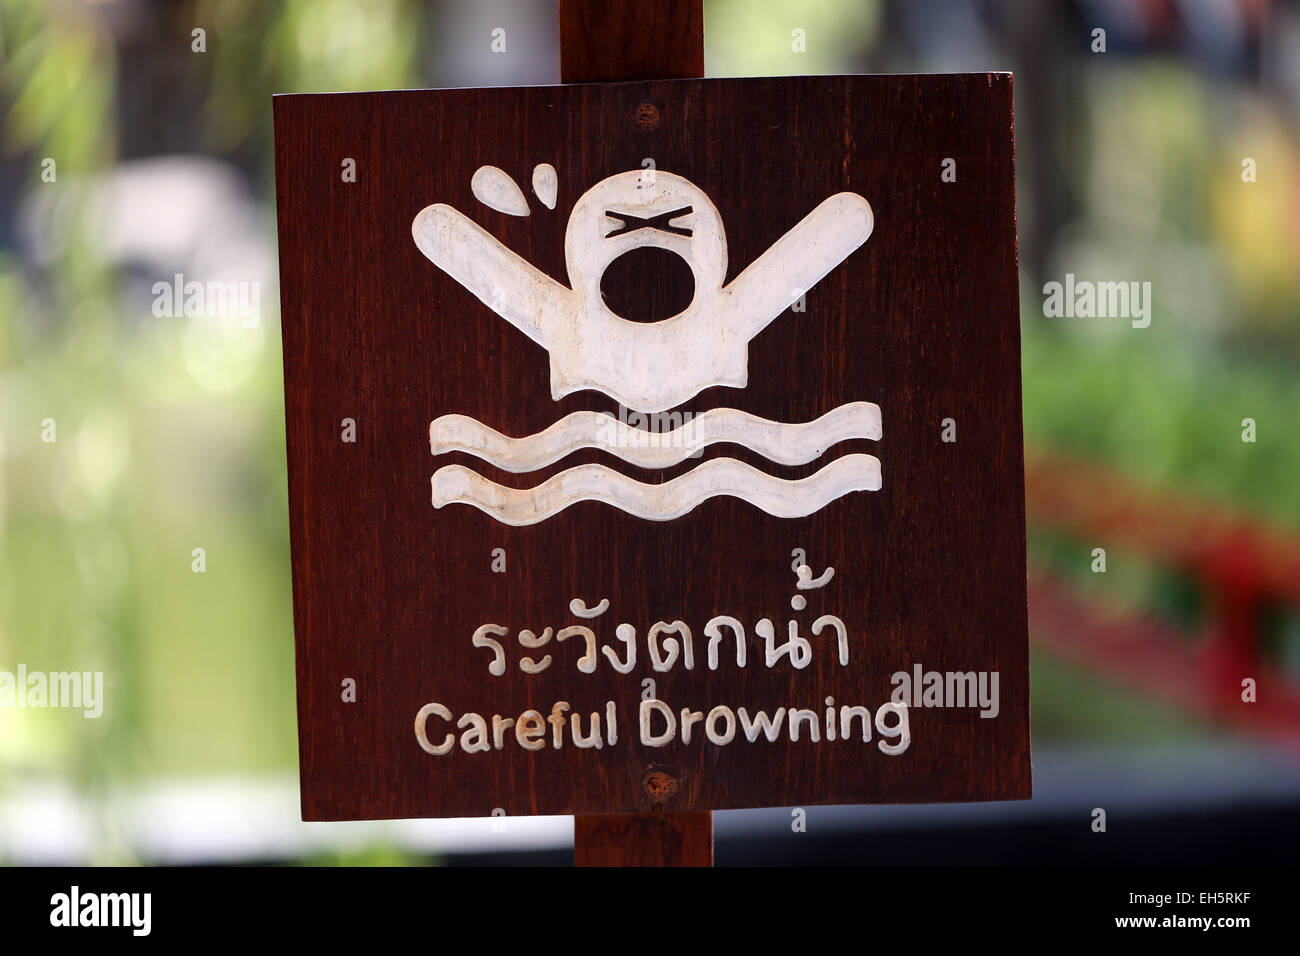 Safety Signs in the park on careful drowning. Stock Photo